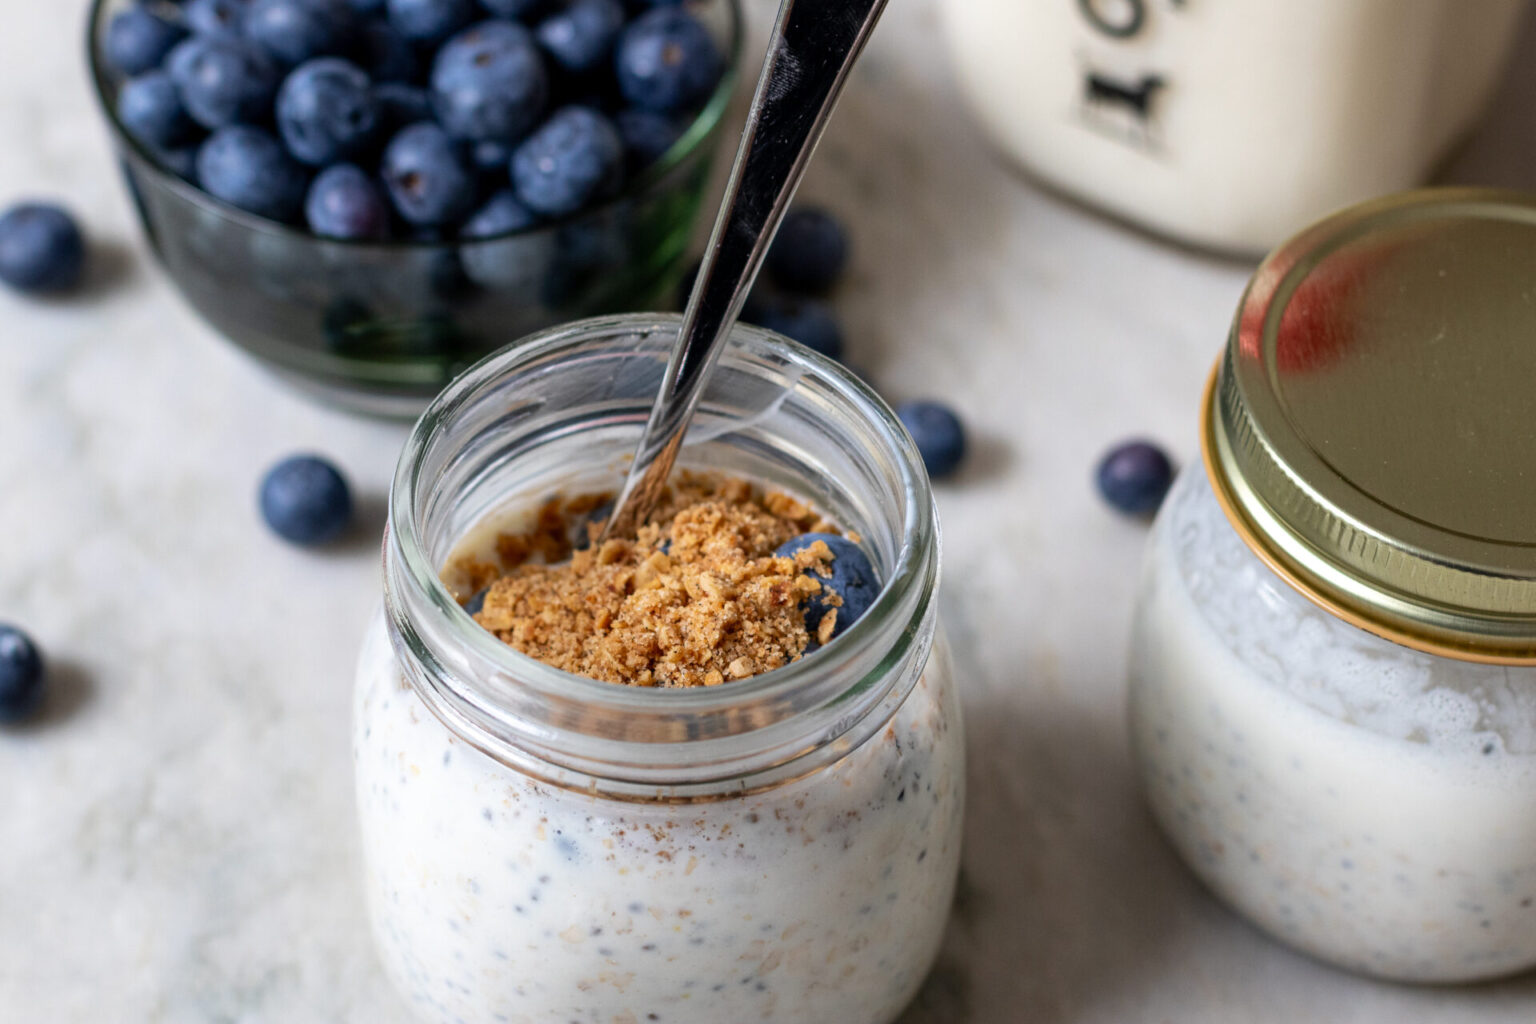 Blueberry Pie-Inspired Overnight Oats - Straus Family Creamery